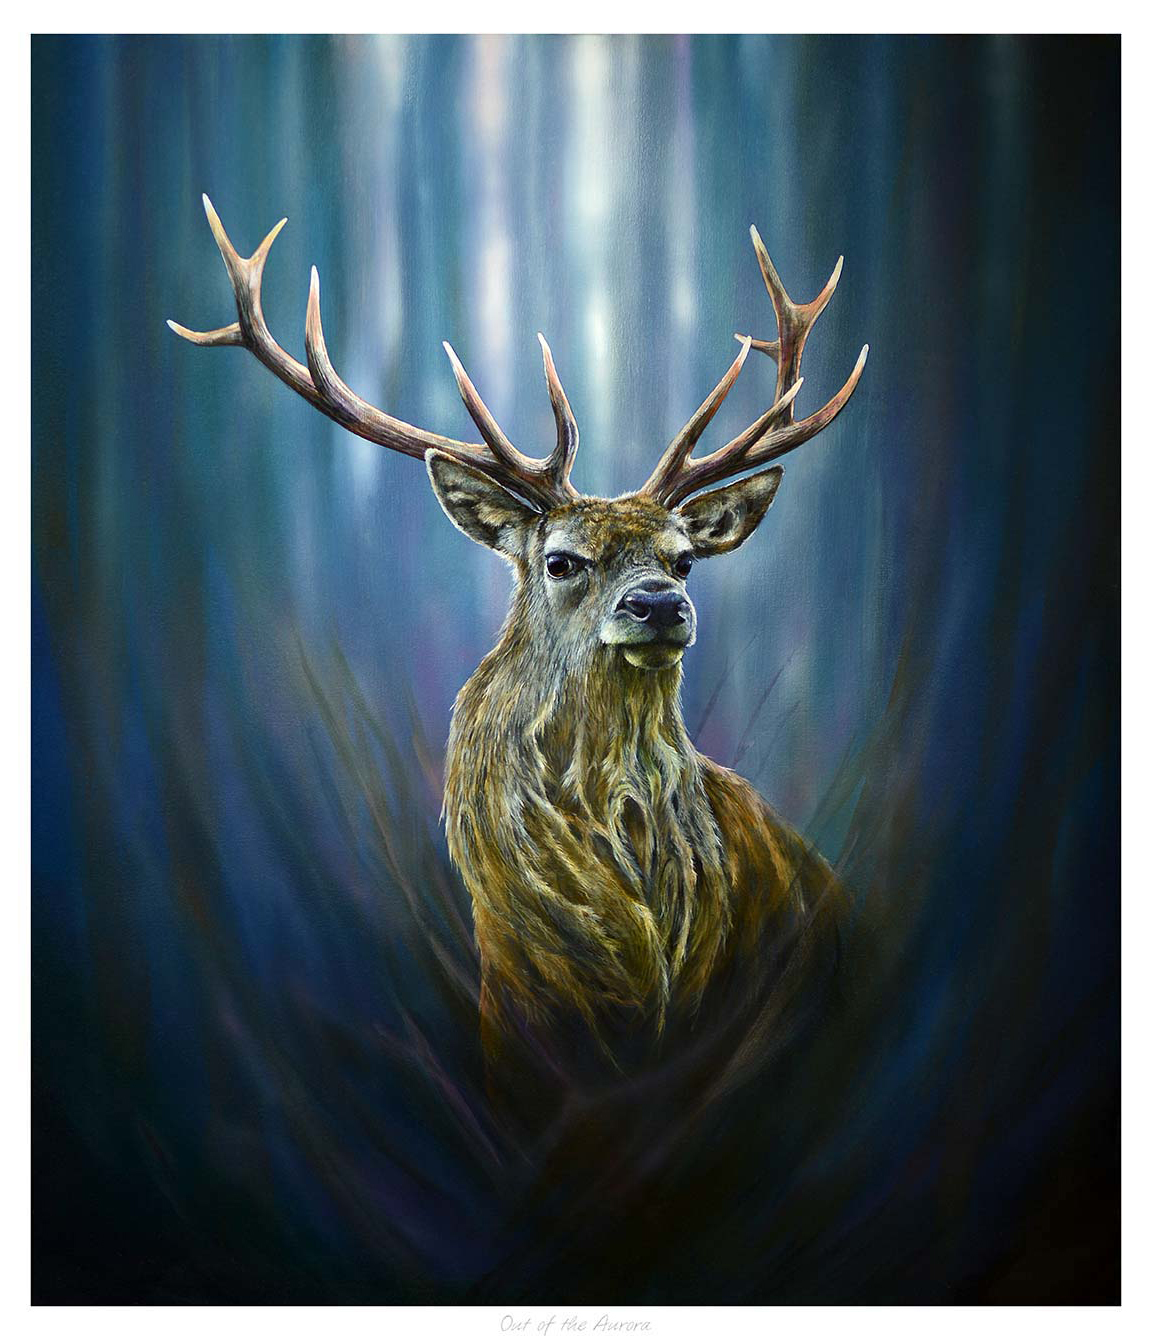 A majestic stag with large antlers stands against a blurred blue background illuminated by vertical light streaks. By Chris Sharp